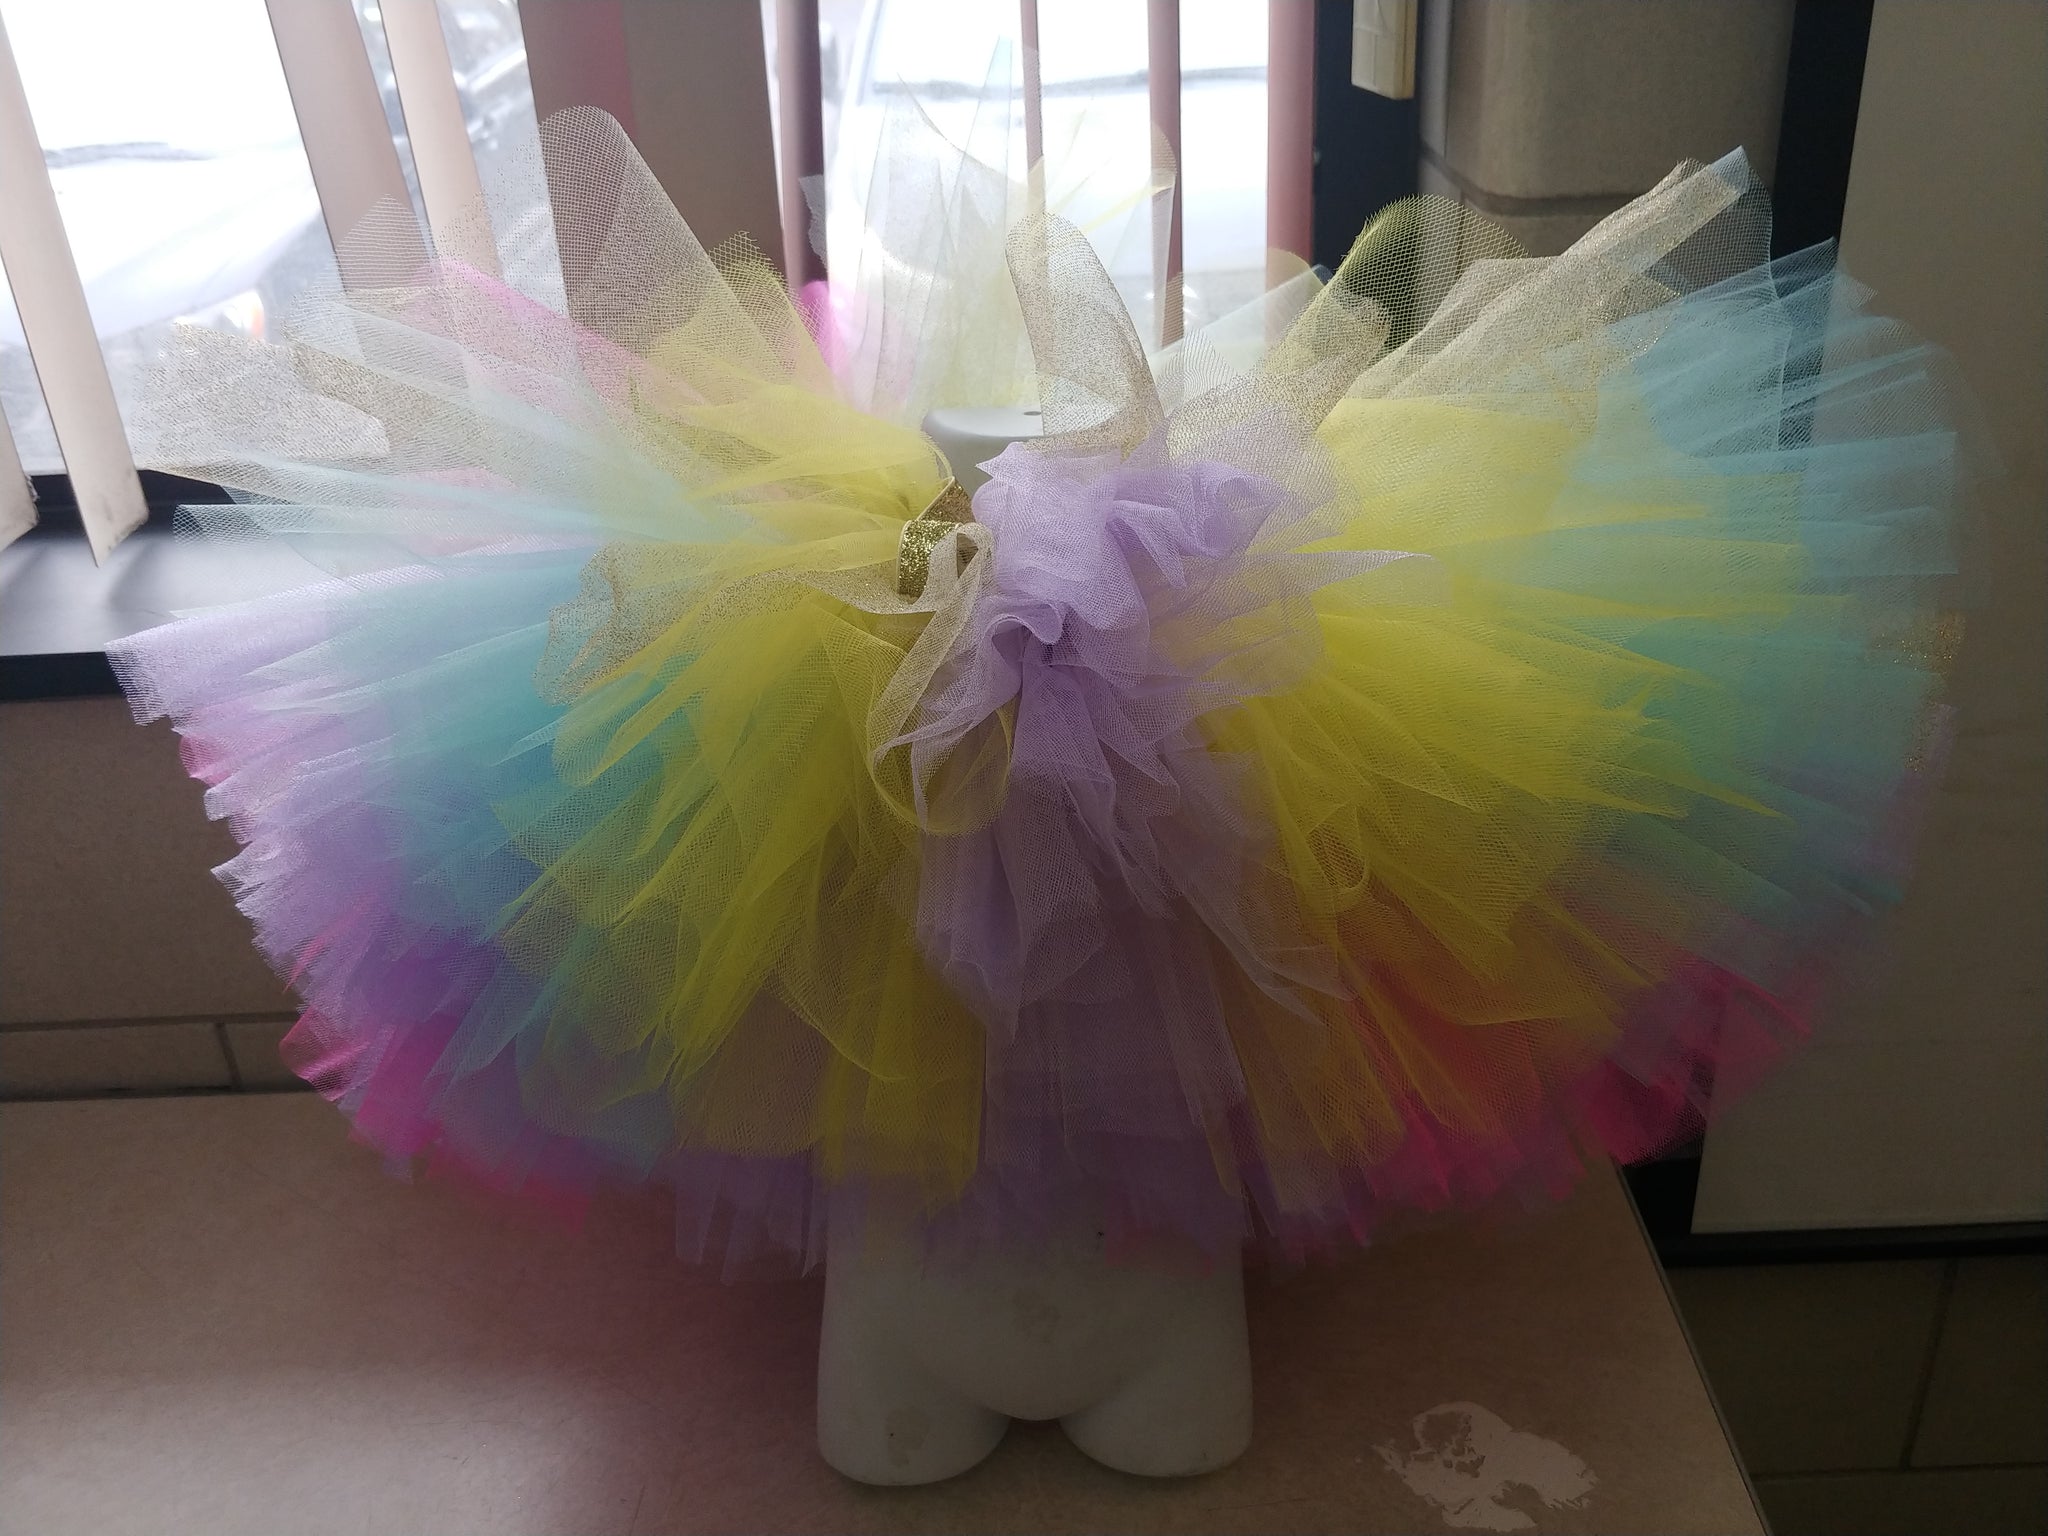 Just a tutu up to 5 colors.